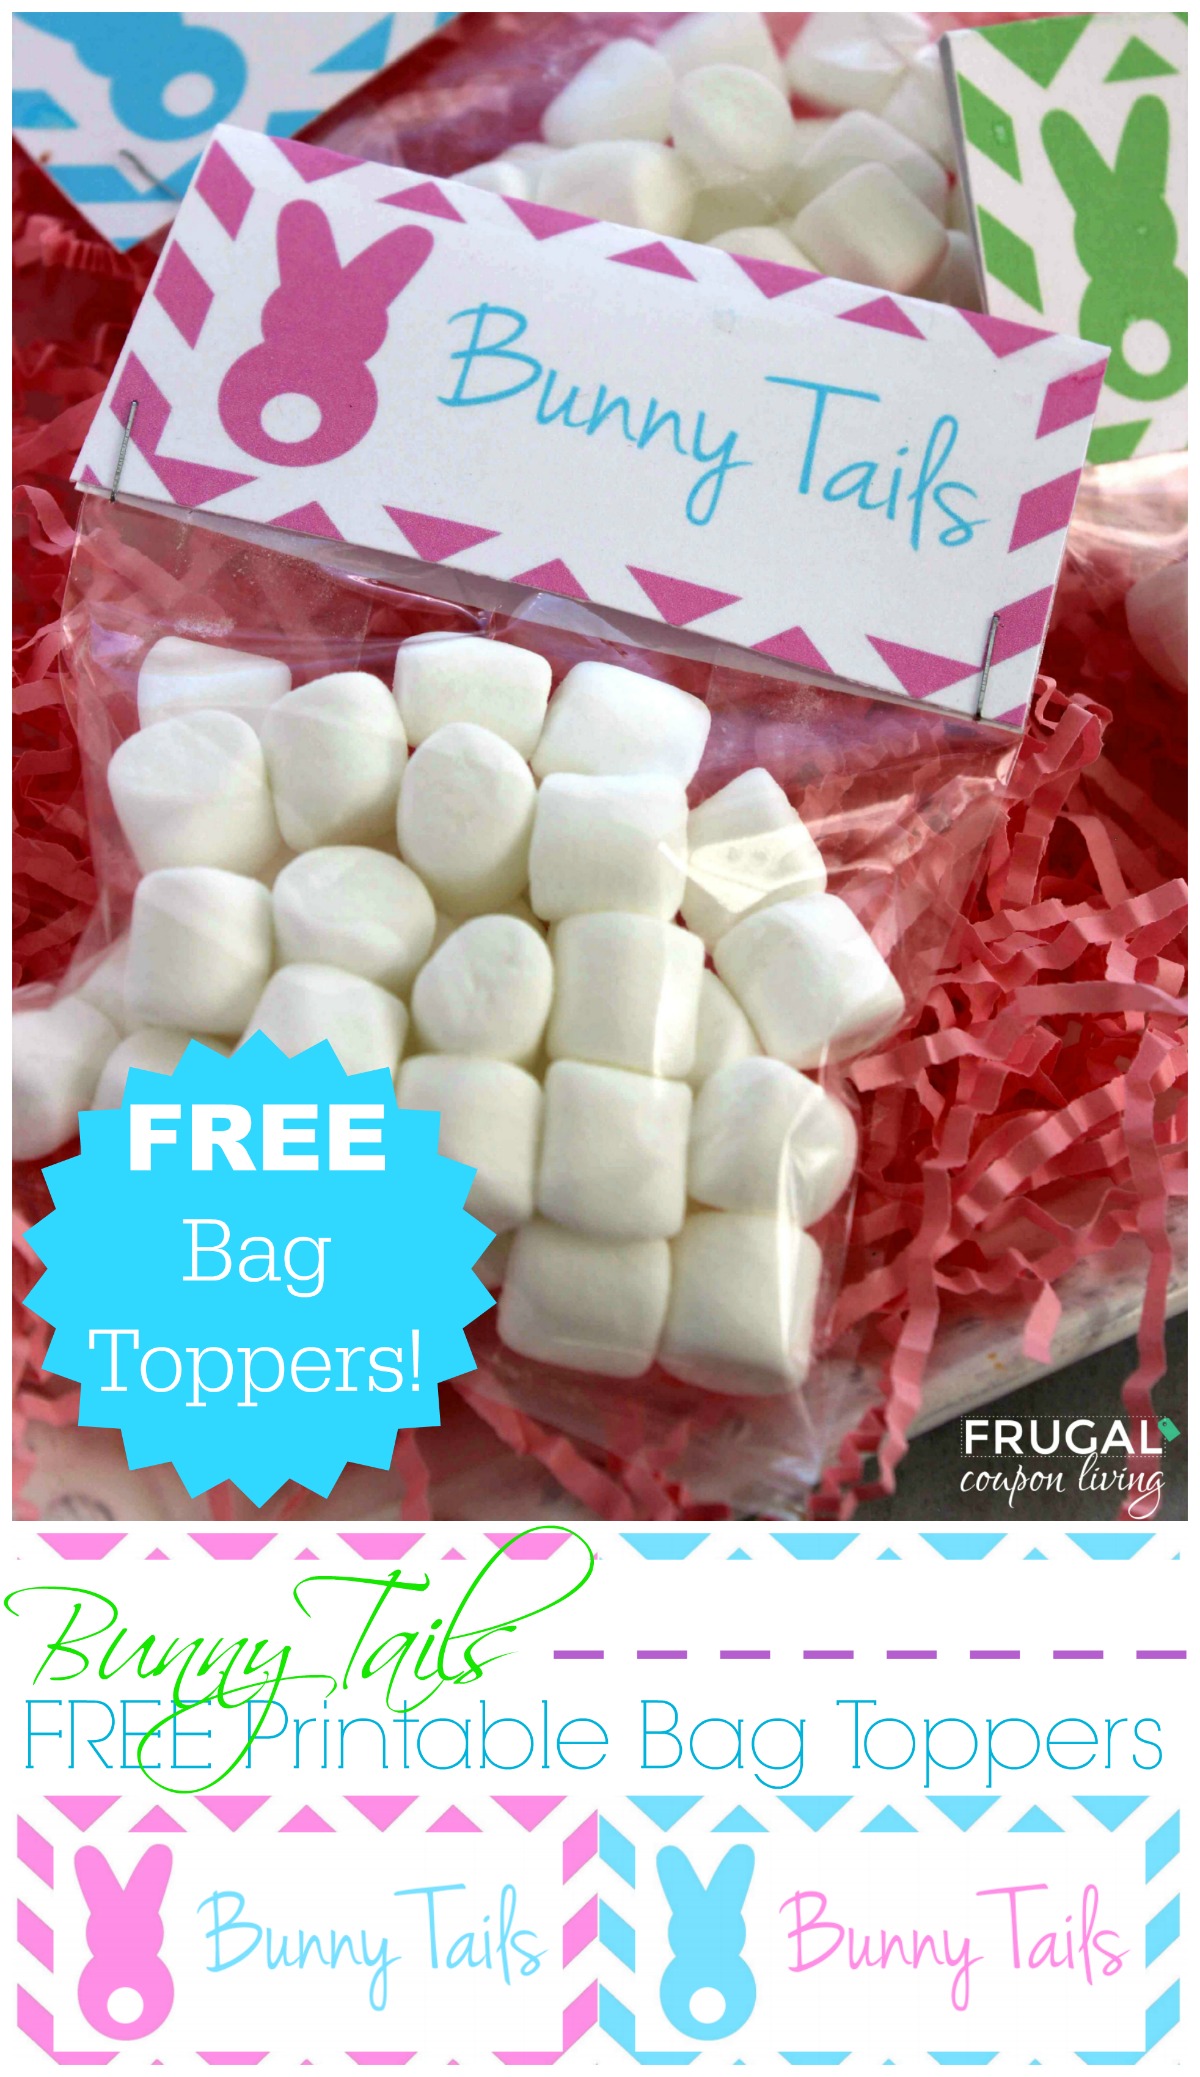 Bunny-Tails-Free-Printable-Bag-Topper-Frugal-Coupon-Living